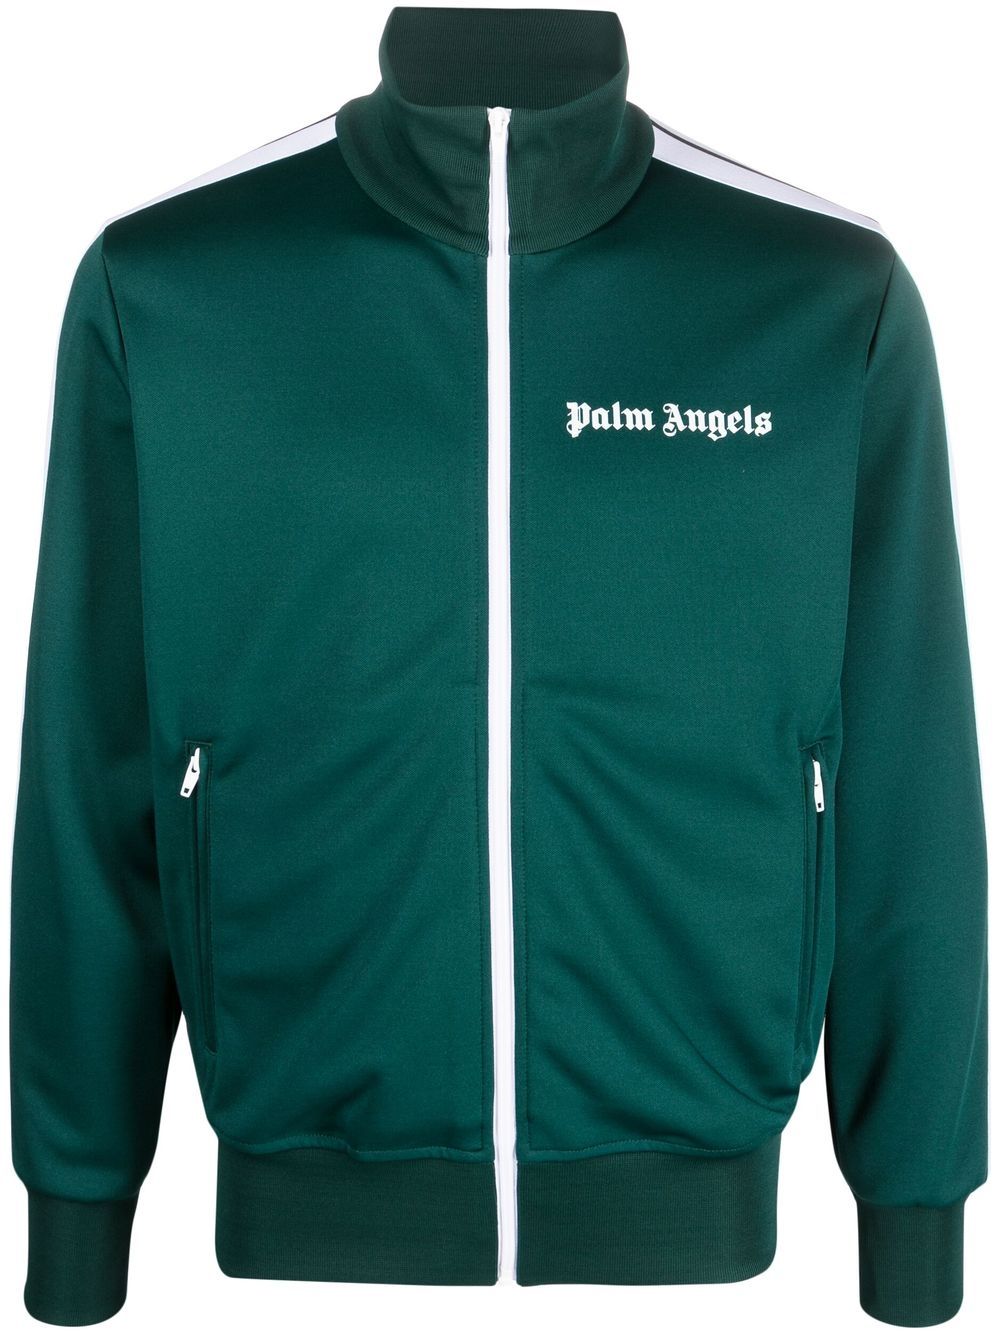 PALM ANGELS TRACKSUIT IN GREEN - Iconic Designer Menswear